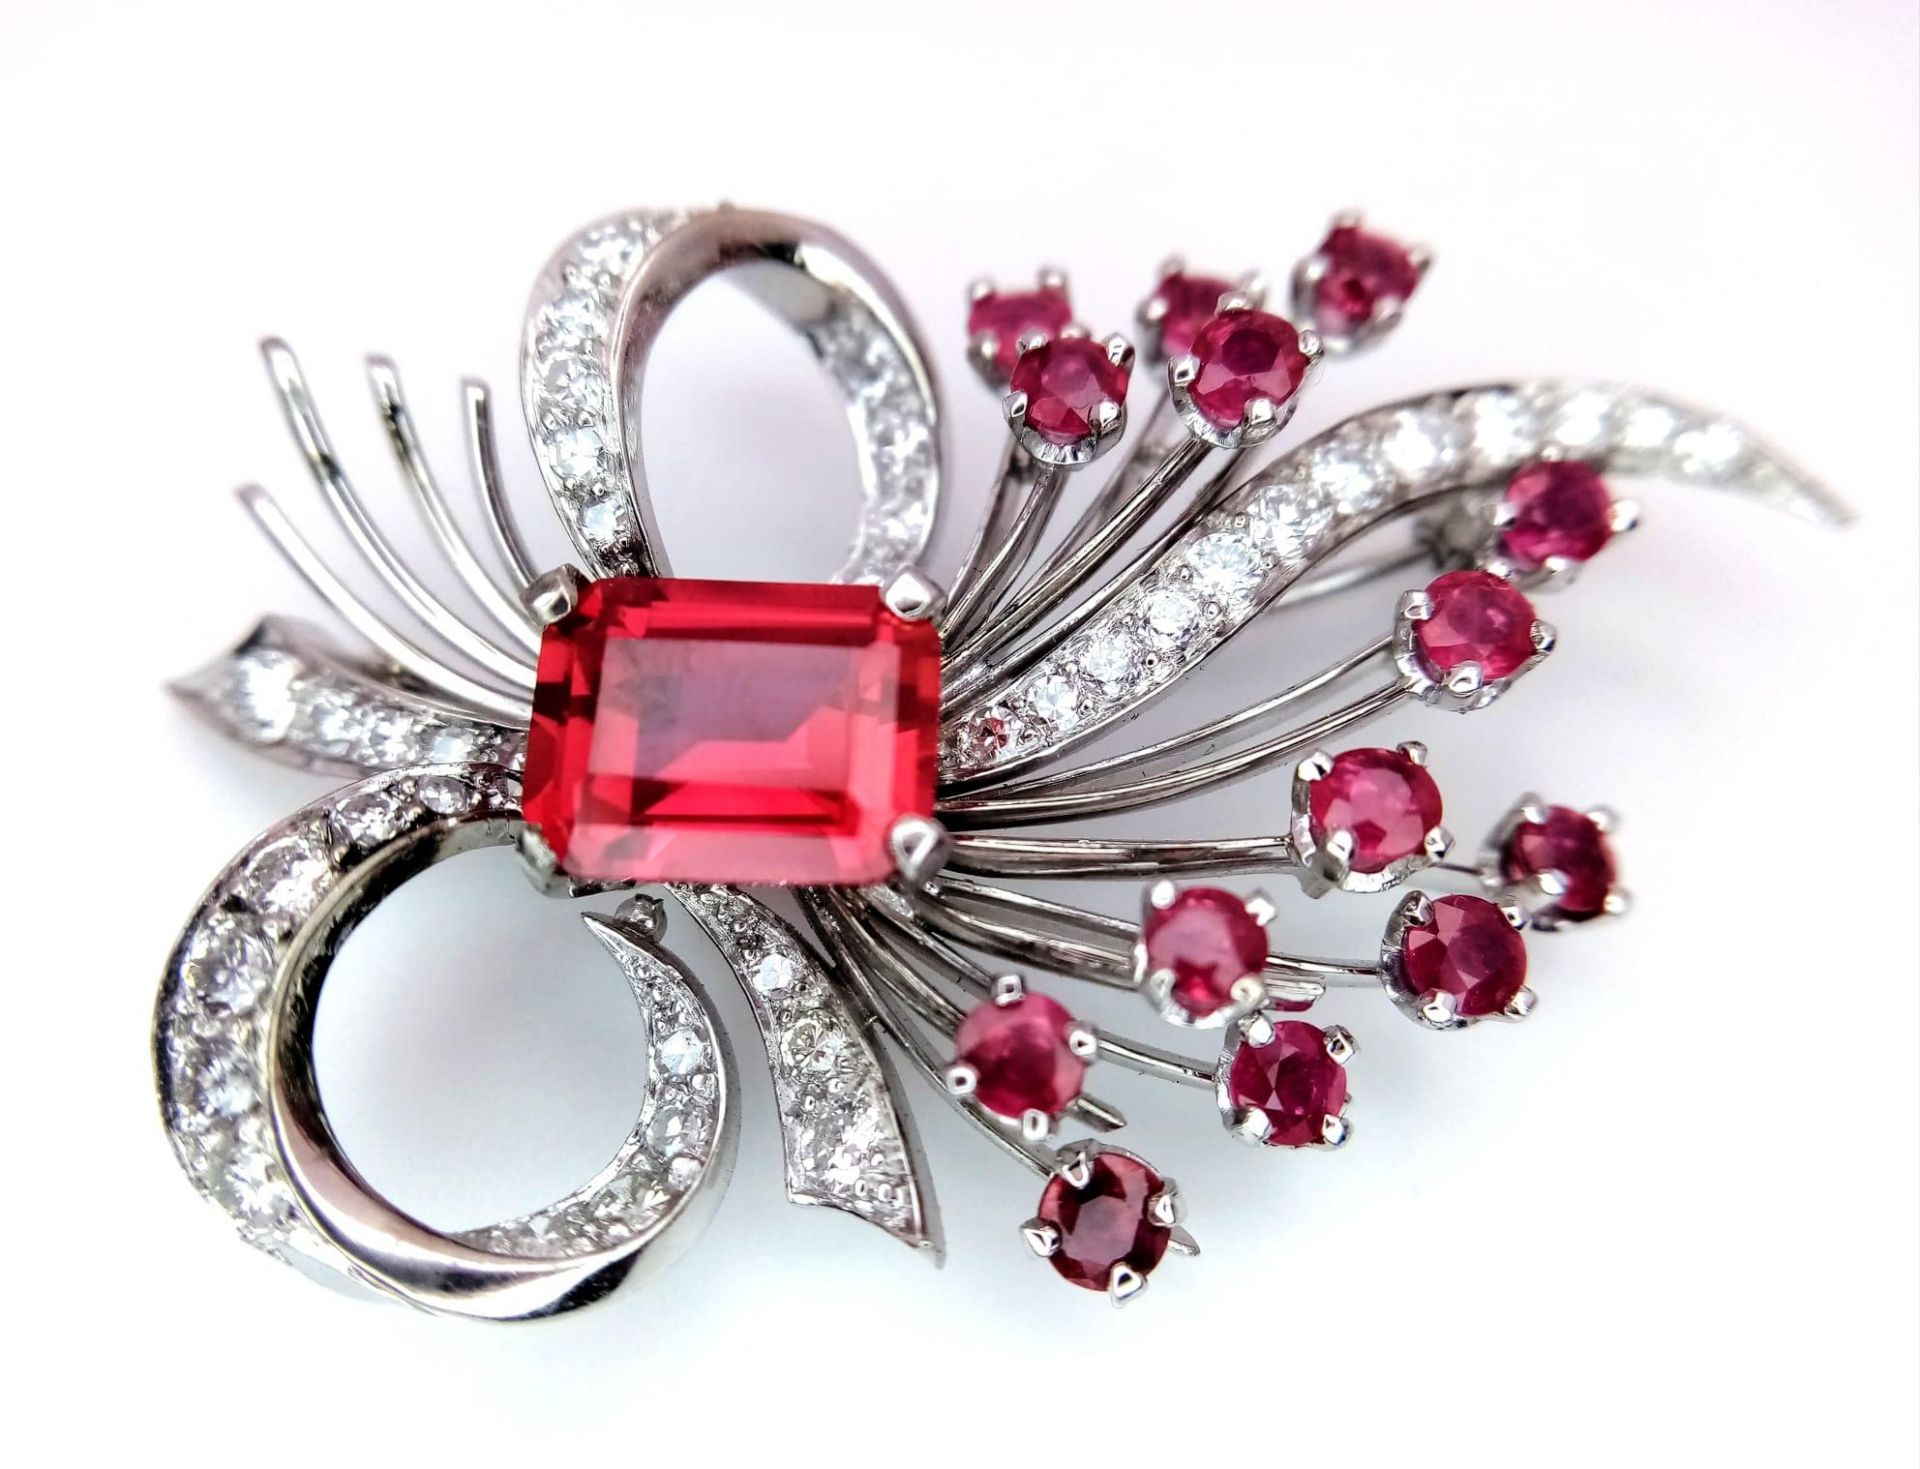 A STUNNING DIAMOND AND RUBY BROOCH SET IN PLATINUM , A MAJESTIC SPRAY OF RUBIES EMINATING FROM A - Image 2 of 7